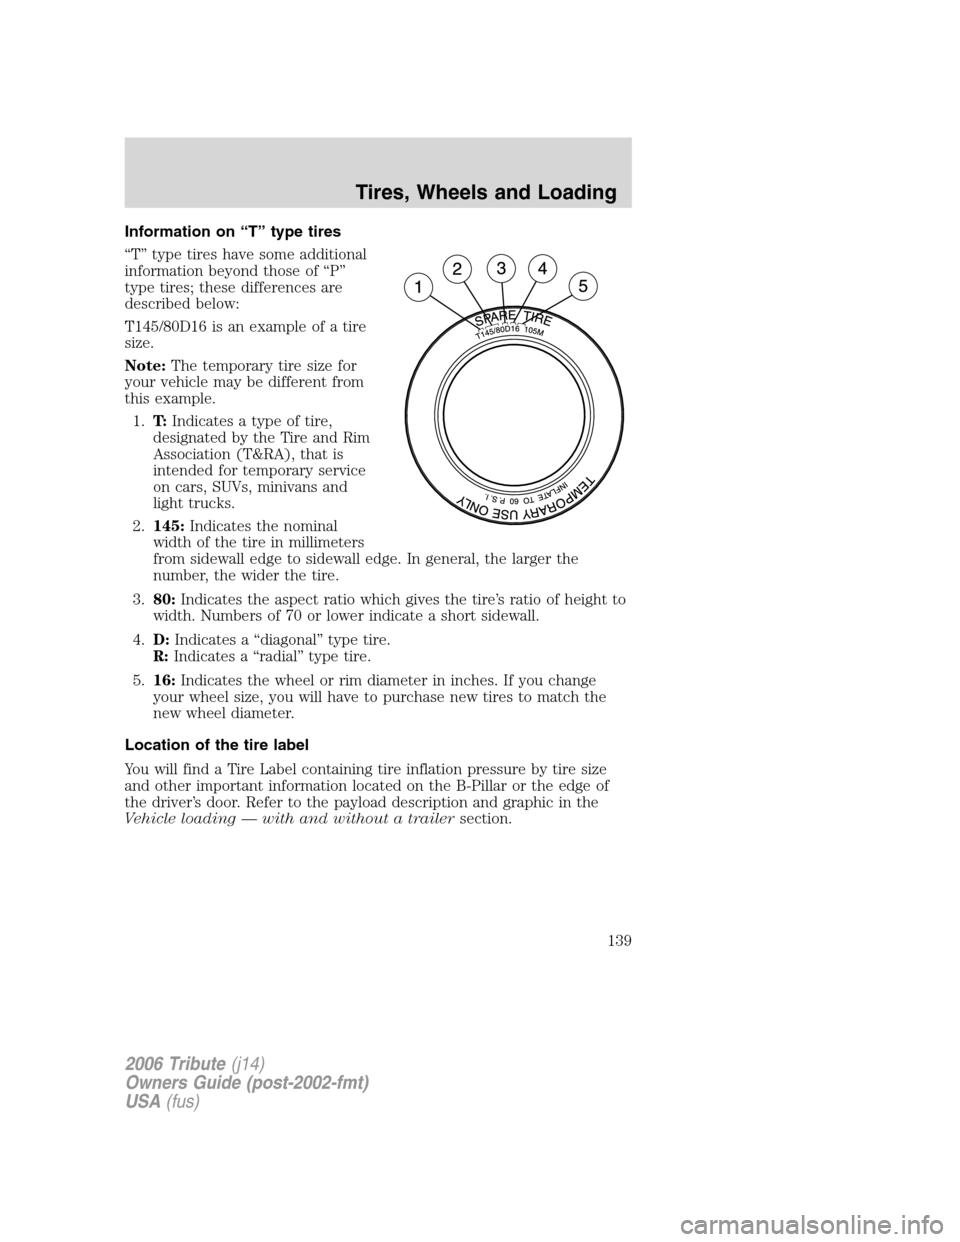 MAZDA MODEL TRIBUTE 2006  Owners Manual (in English) Information on “T” type tires
“T” type tires have some additional
information beyond those of “P”
type tires; these differences are
described below:
T145/80D16 is an example of a tire
size